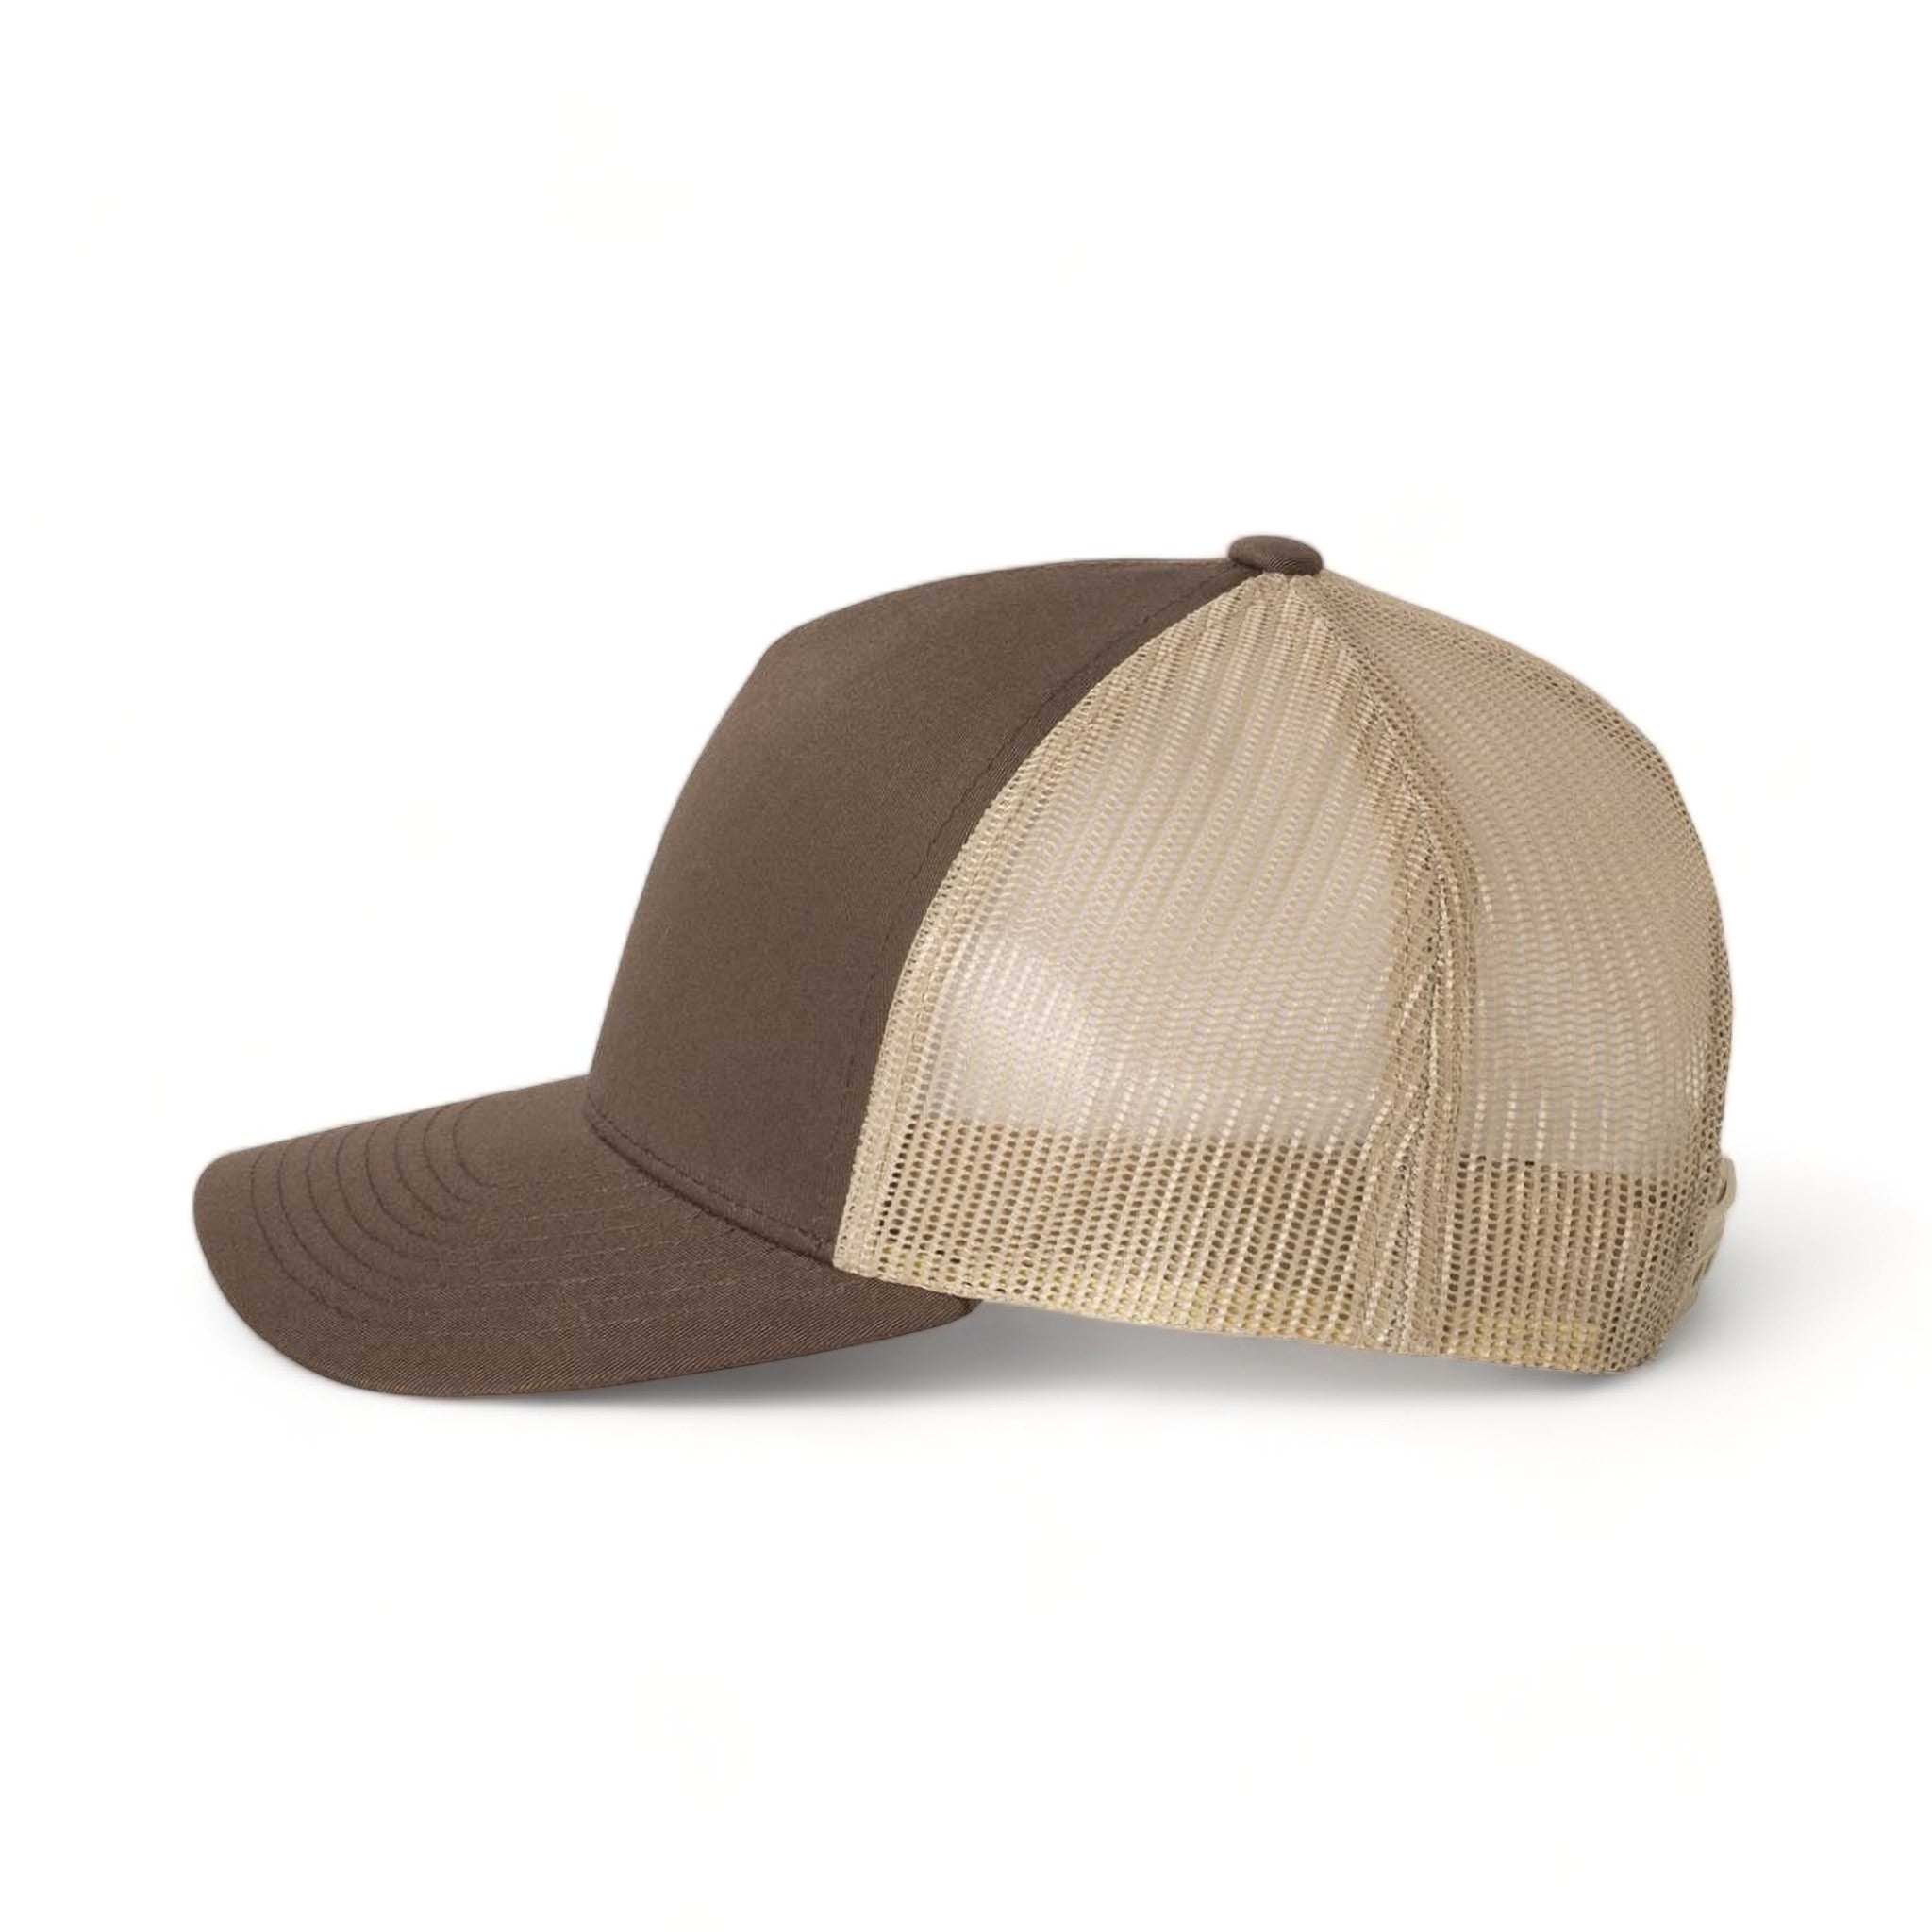 Side view of YP Classics 6506 custom hat in brown and khaki